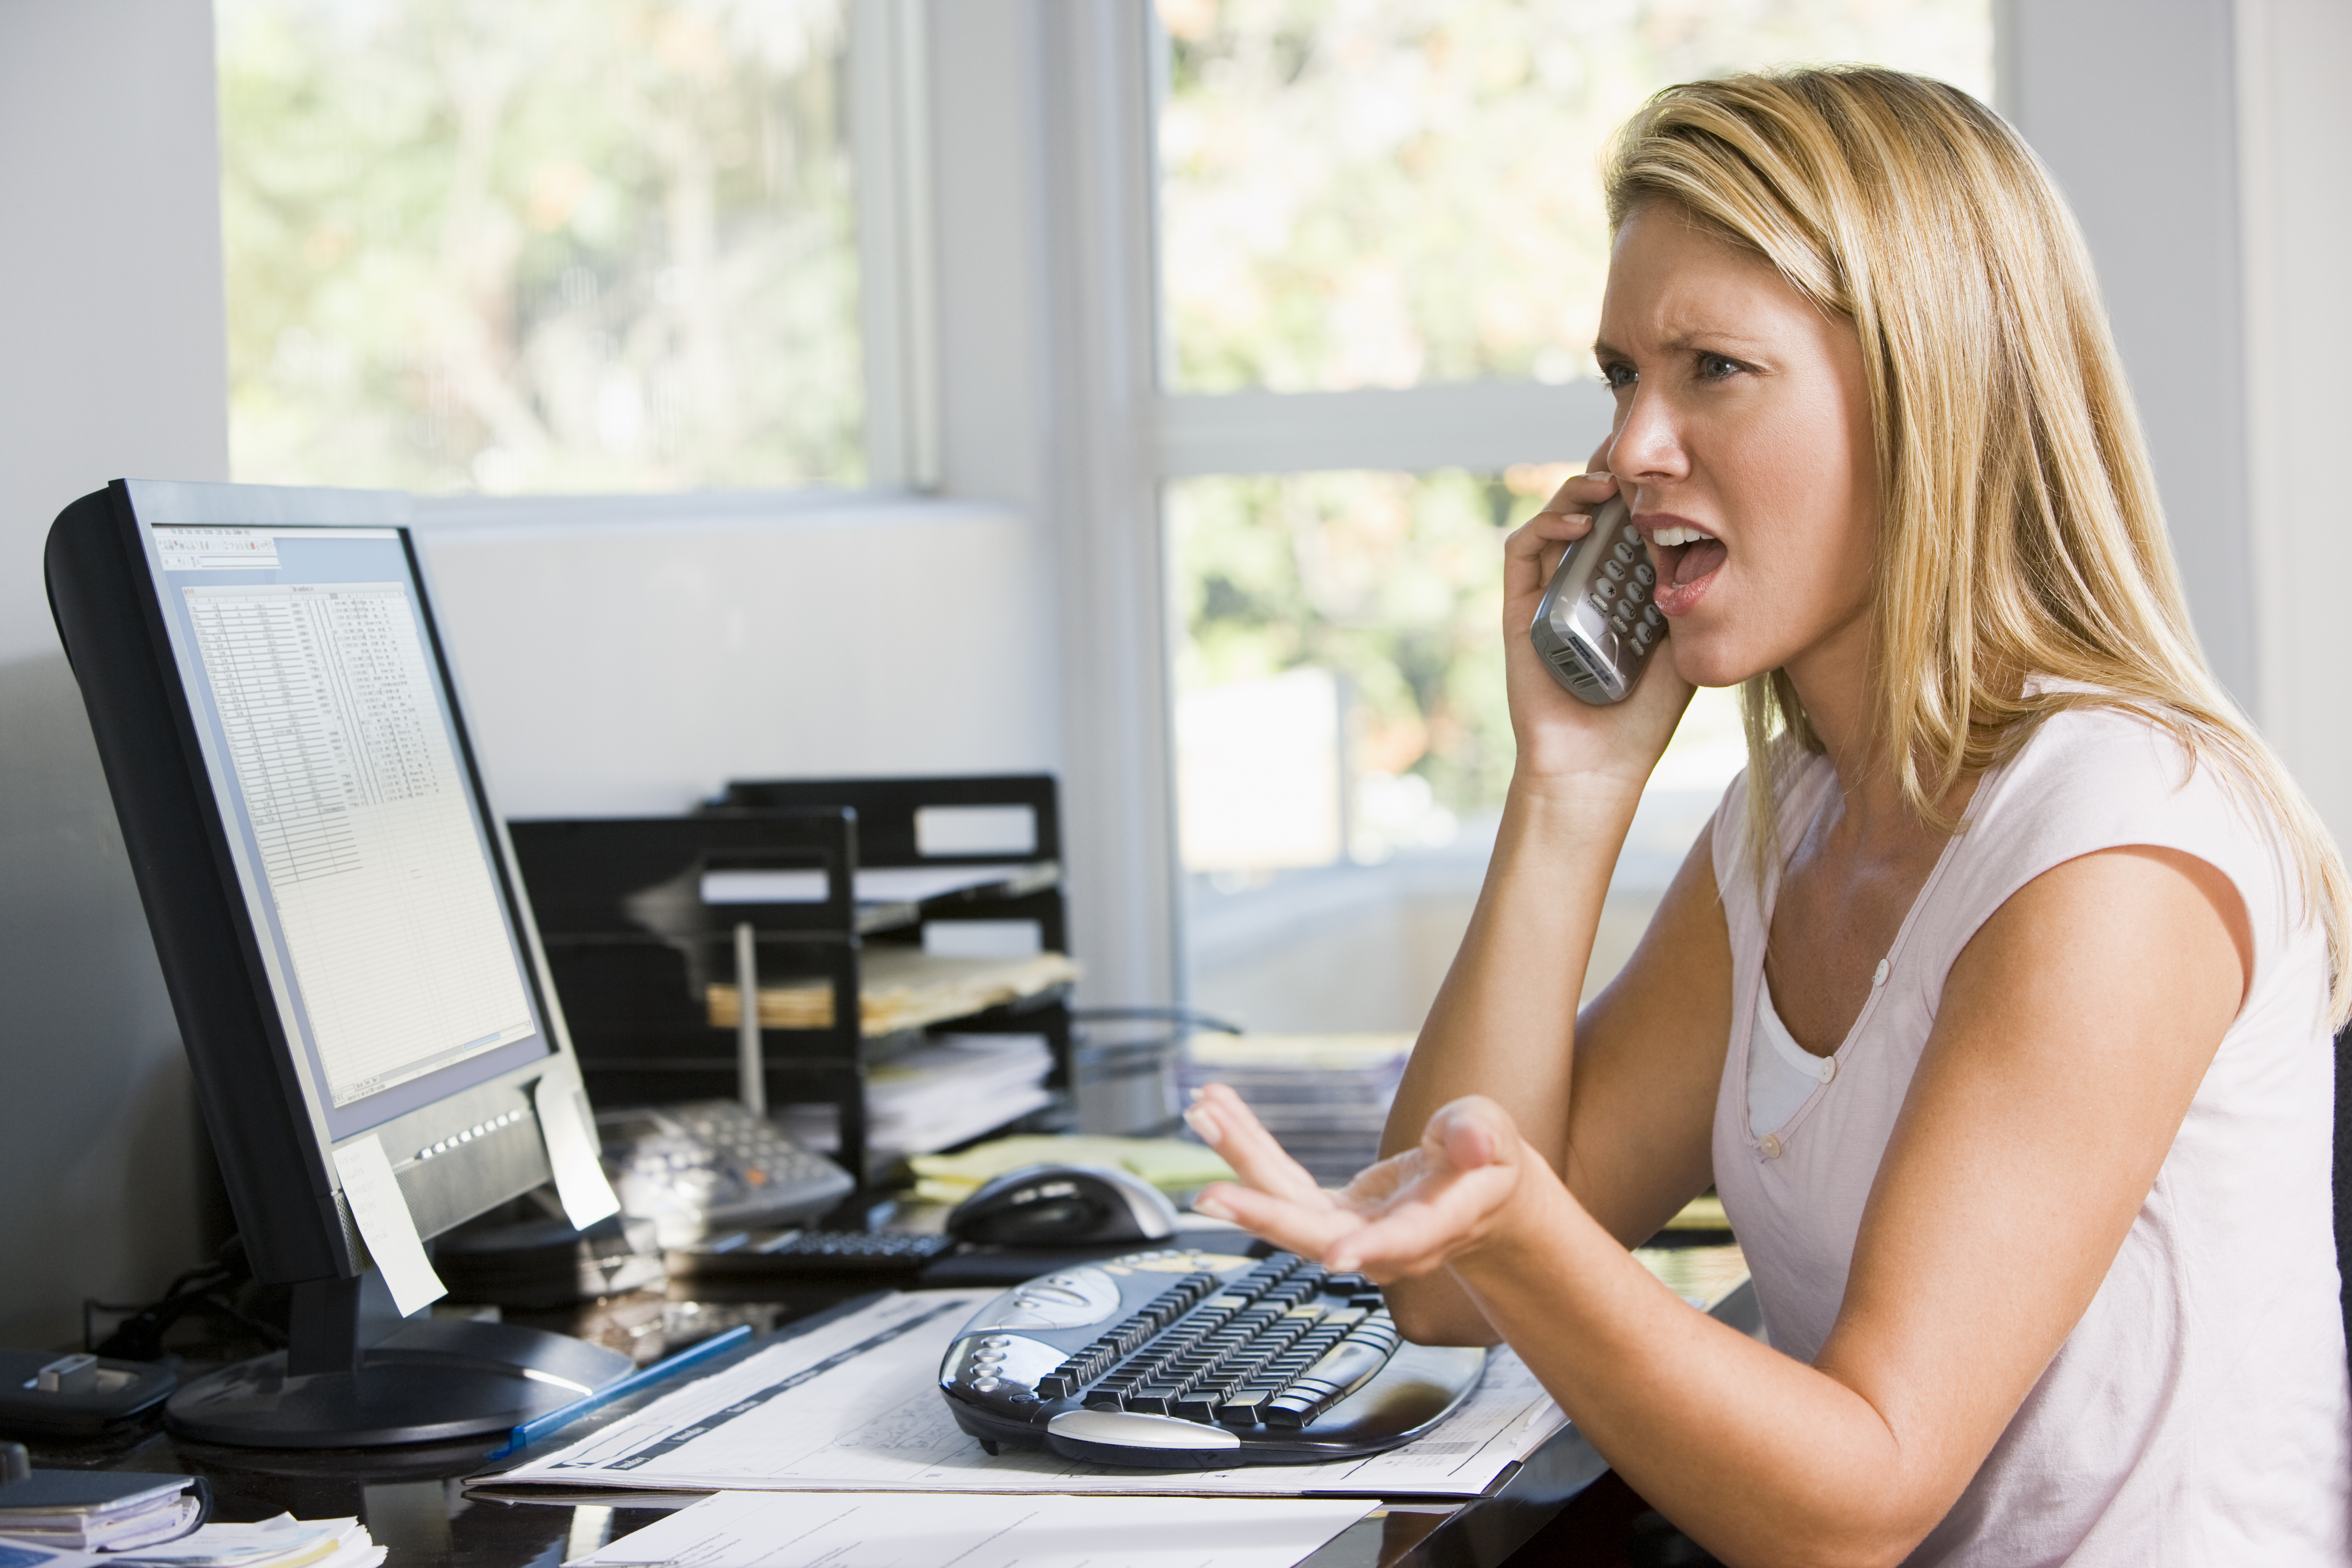 Woman getting mad on the phone | Source: Shutterstock